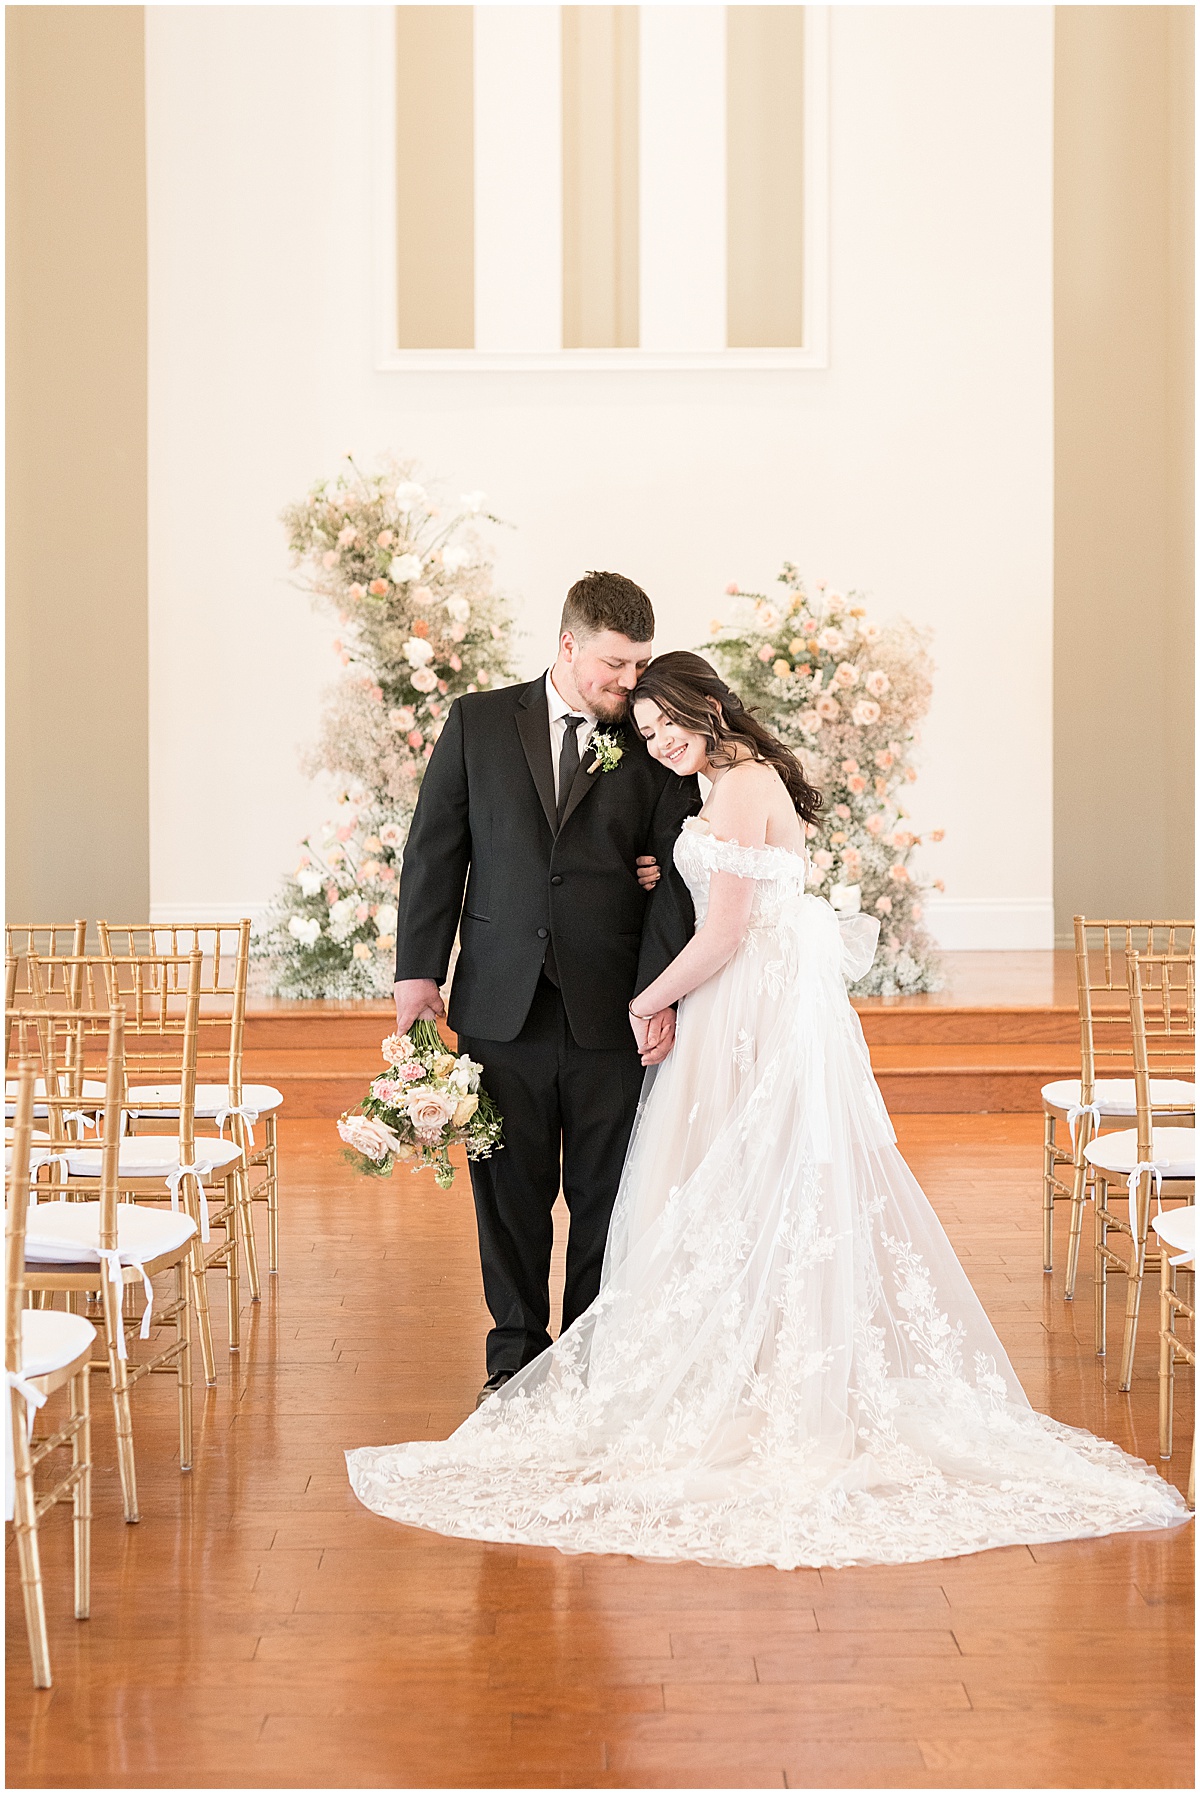 Bride and groom get close at Ritz Charles Chapel wedding in Carmel, Indiana photographed by Victoria Rayburn Photography